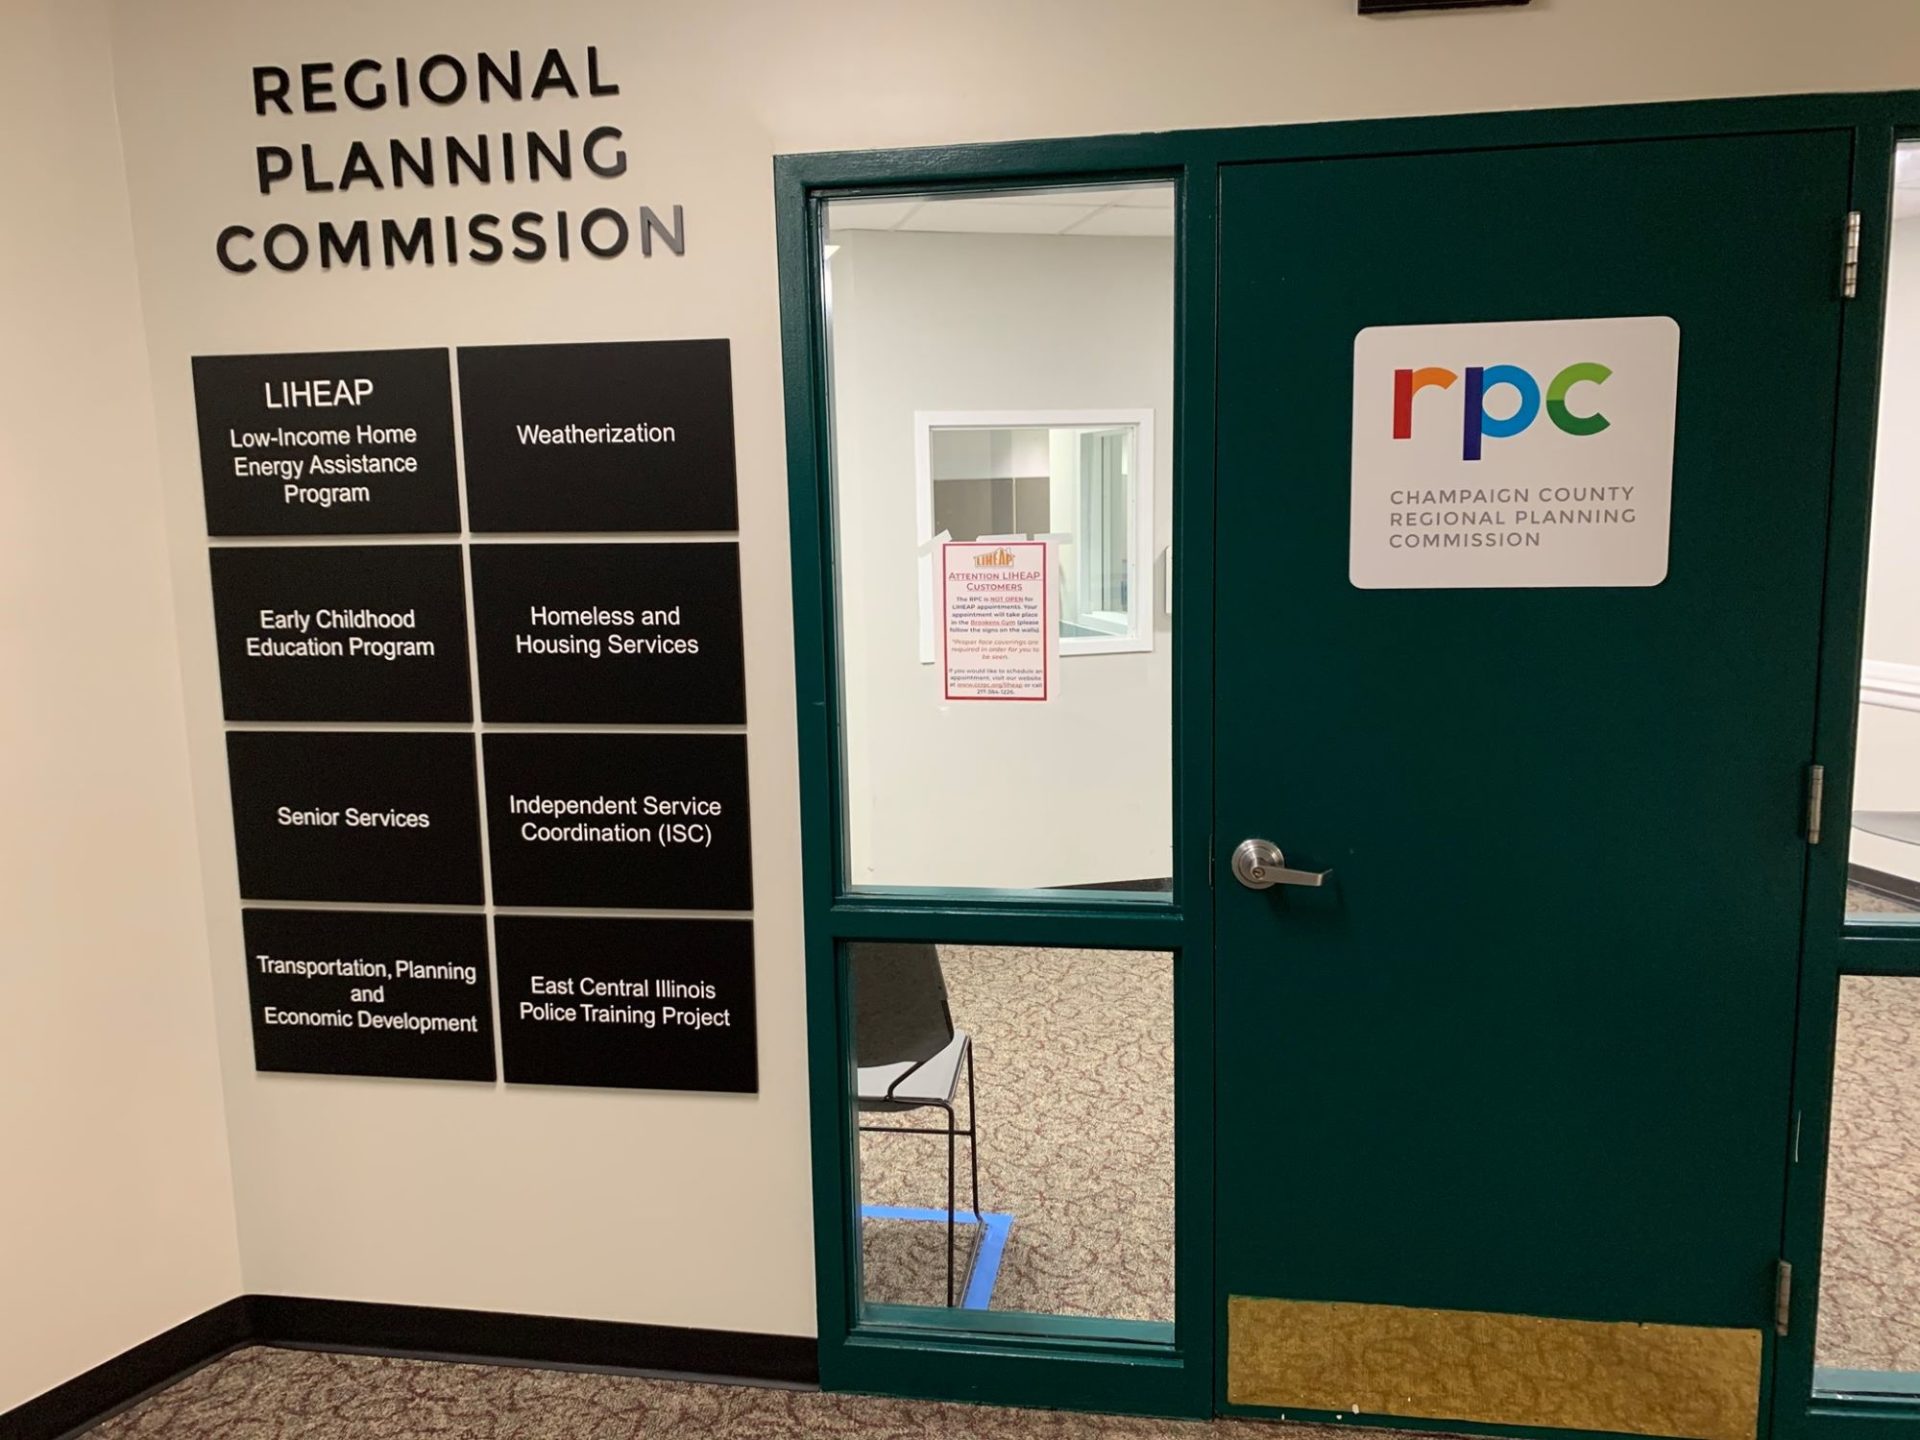 The entrance to the regional planning commission office. It has a black door with windows alongside it, and signs indicated provided services on the wall beside it.